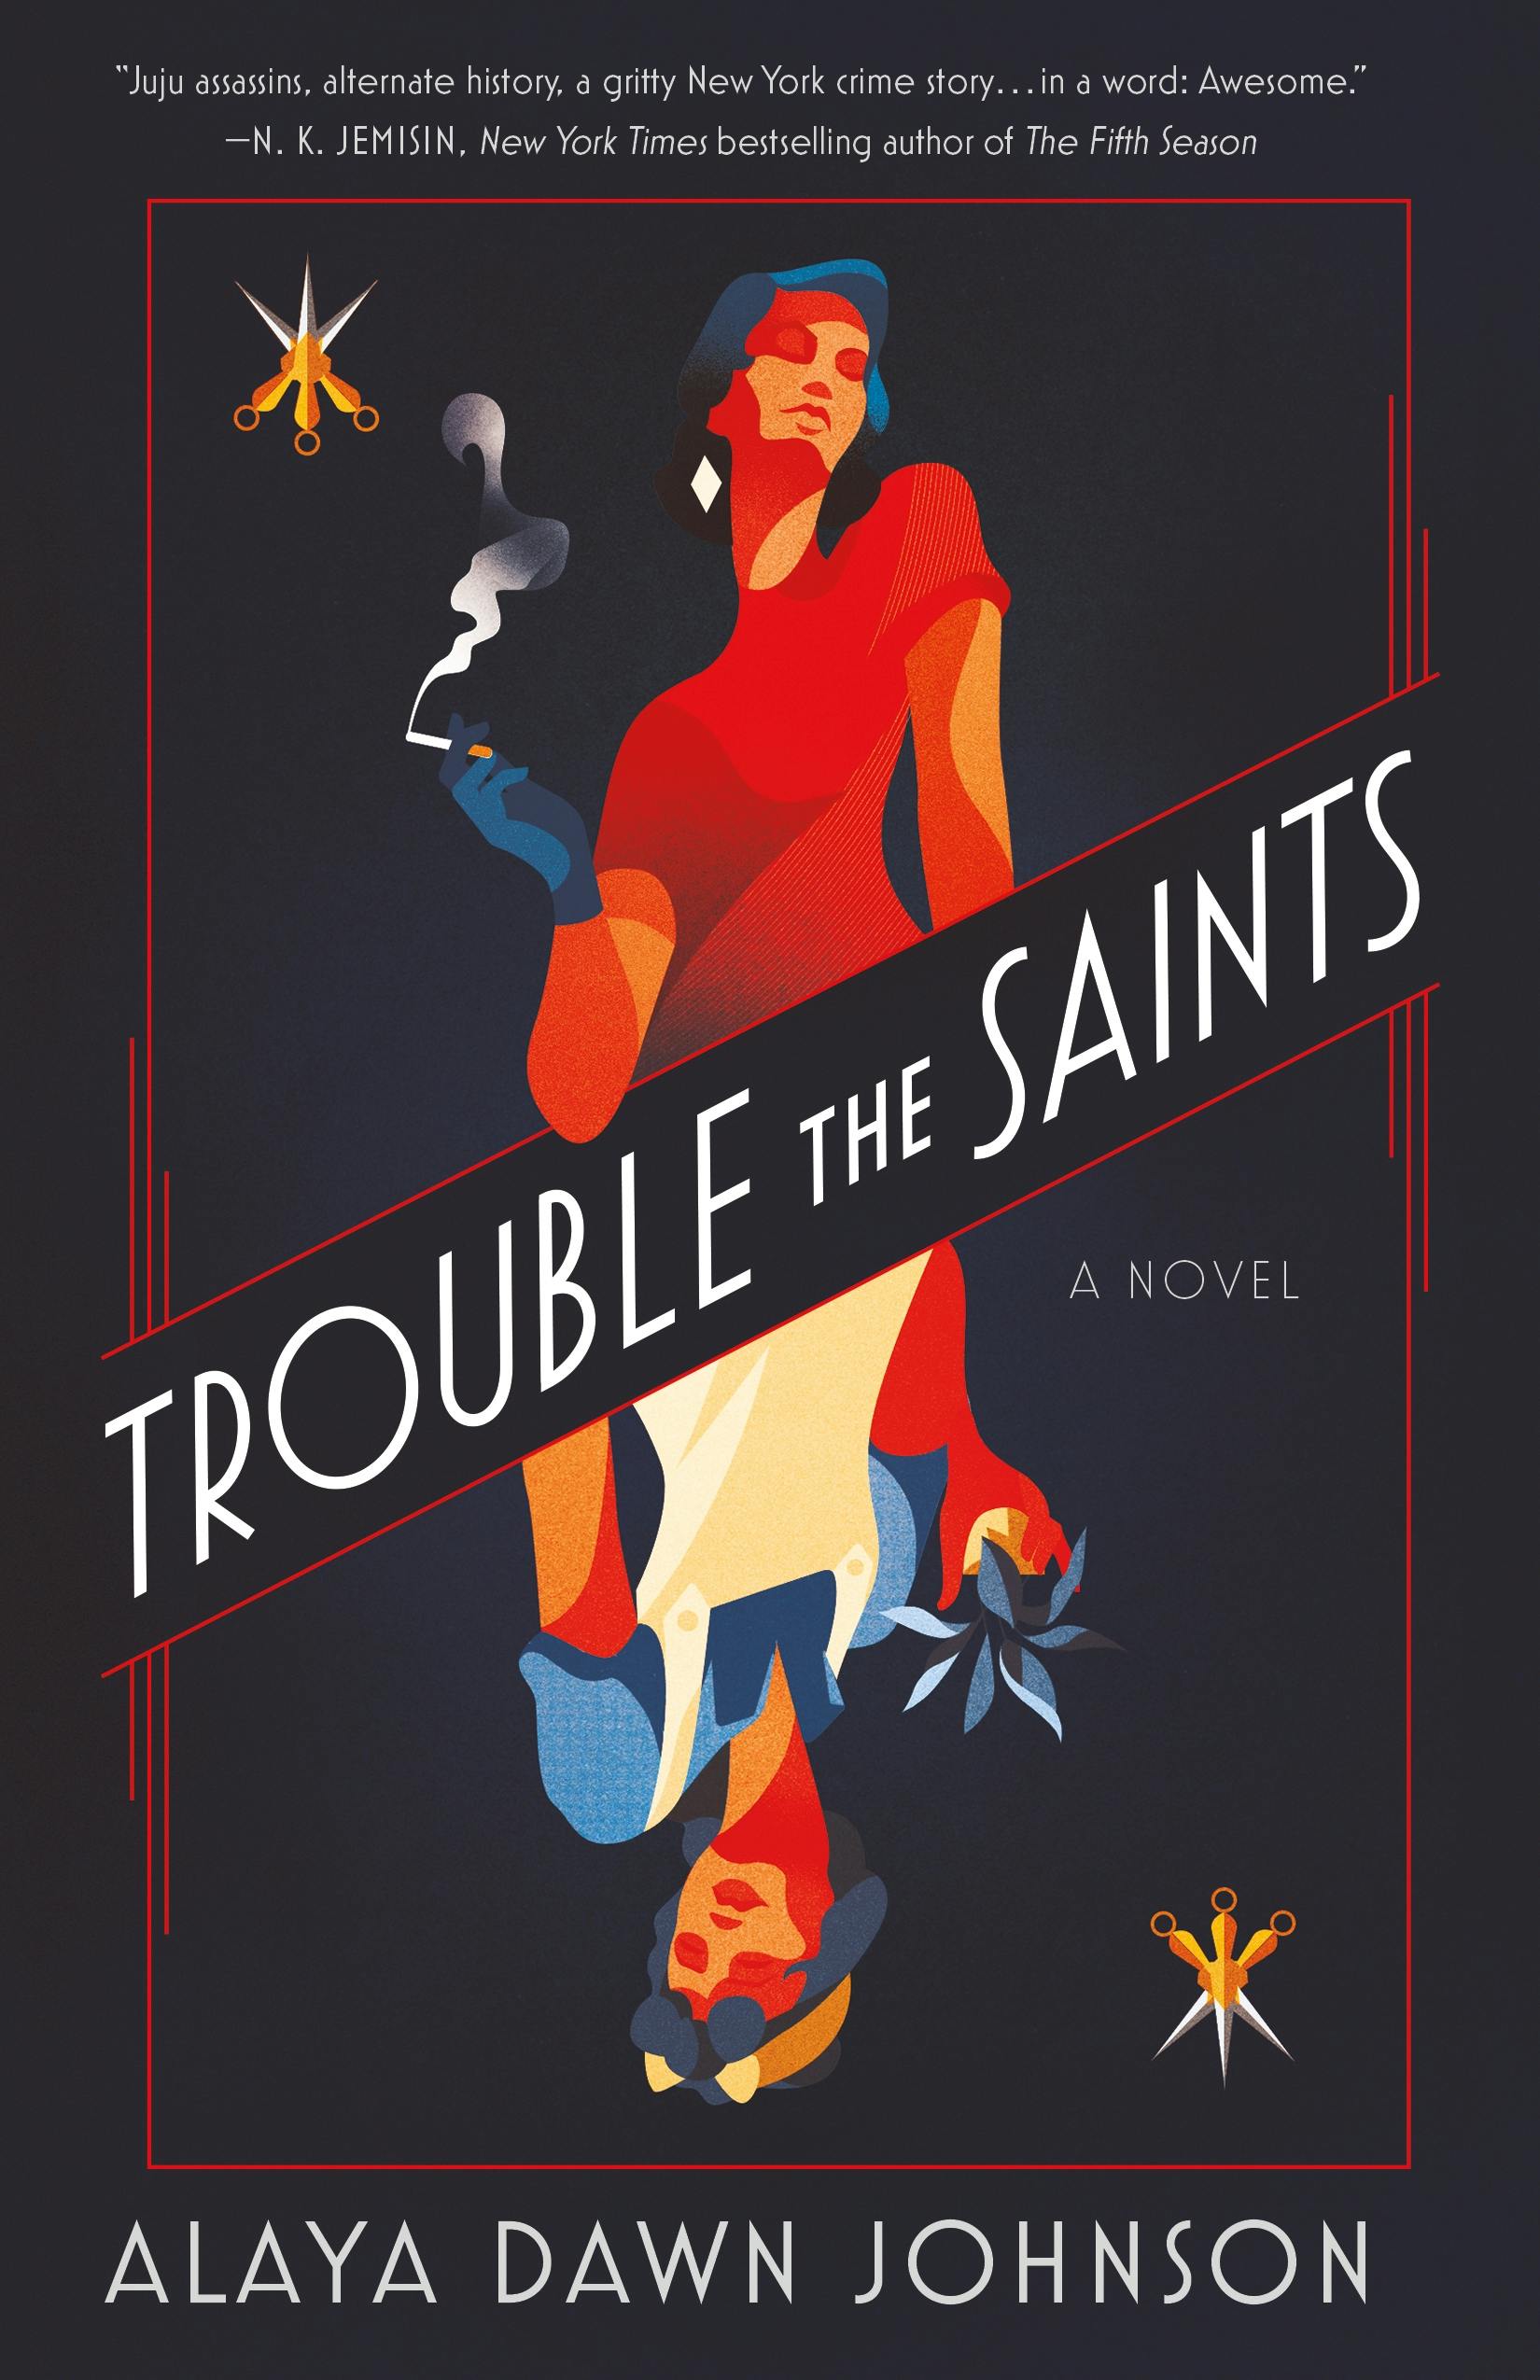 Cover for the book titled as: Trouble the Saints